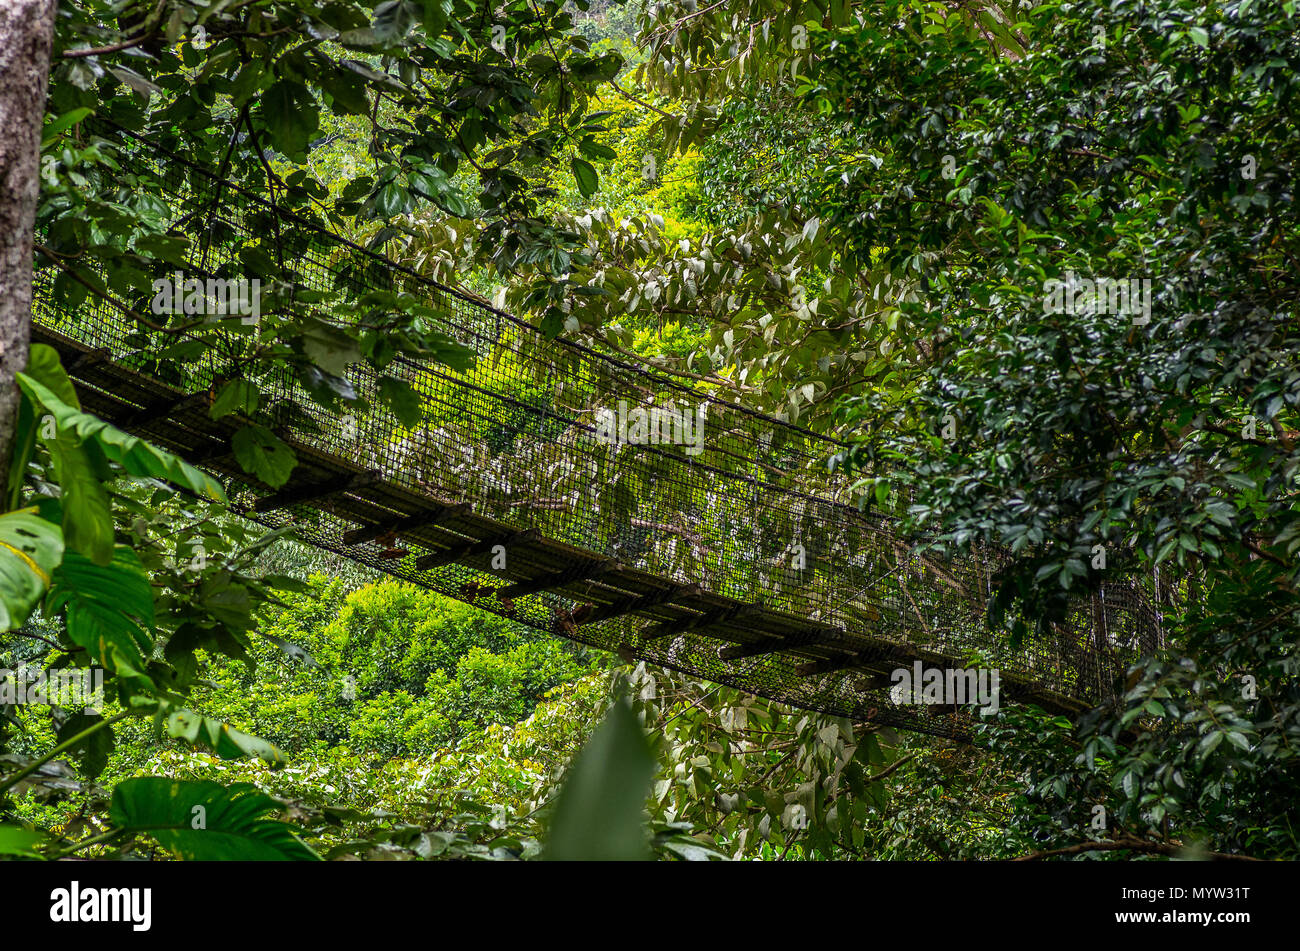 Wooden suspension bridge in the rain forest, Guadeloupe, french antilles Stock Photo